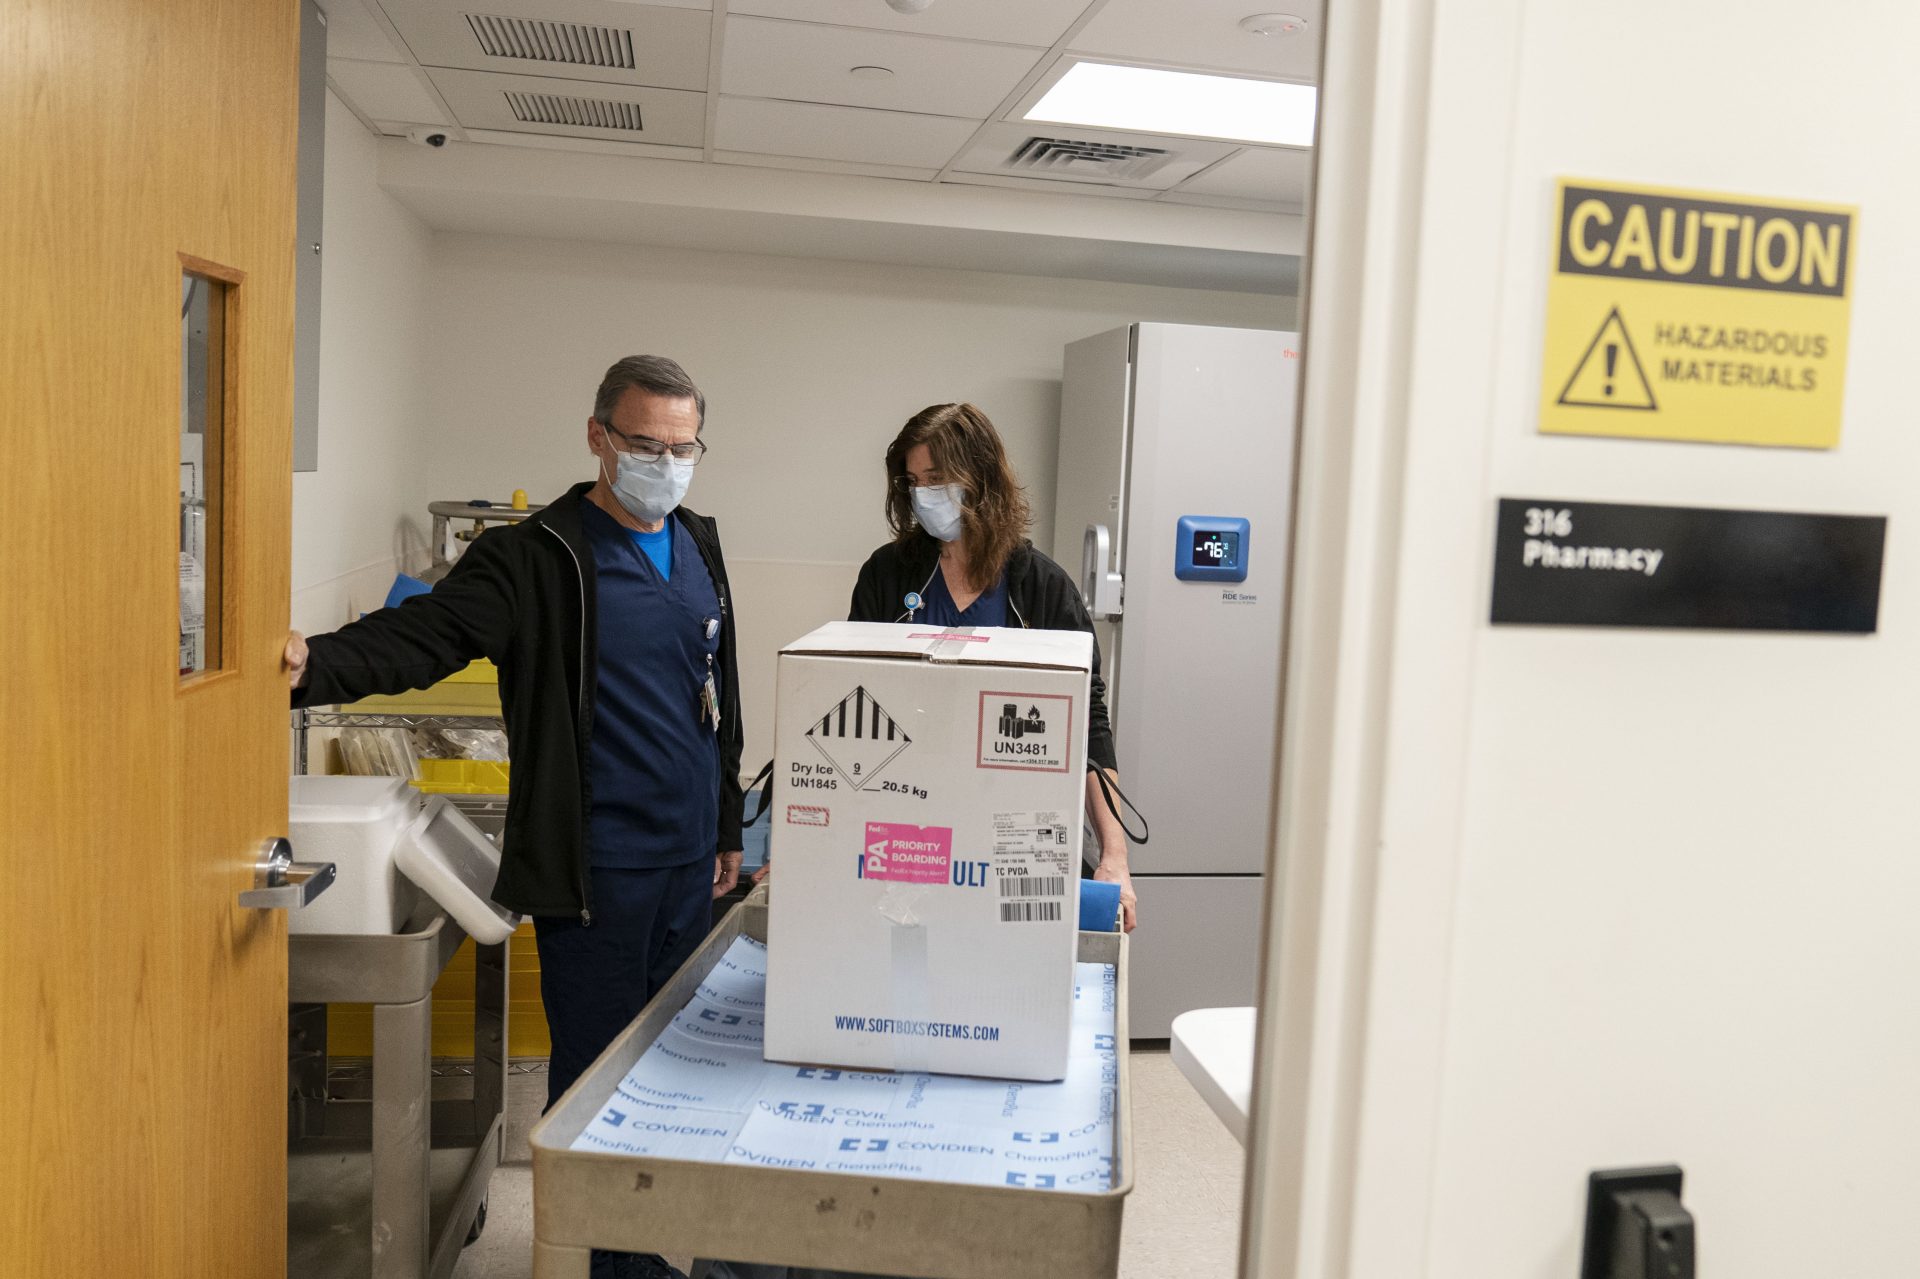 Pharmacists Richard Emery, left, and Karen Nolan, wheel a box containing the Pfizer-BioNTech COVID-19 vaccine next to a storage freezer as it arrives at Rhode Island Hospital in Providence, R.I, Monday, Dec. 14, 2020.